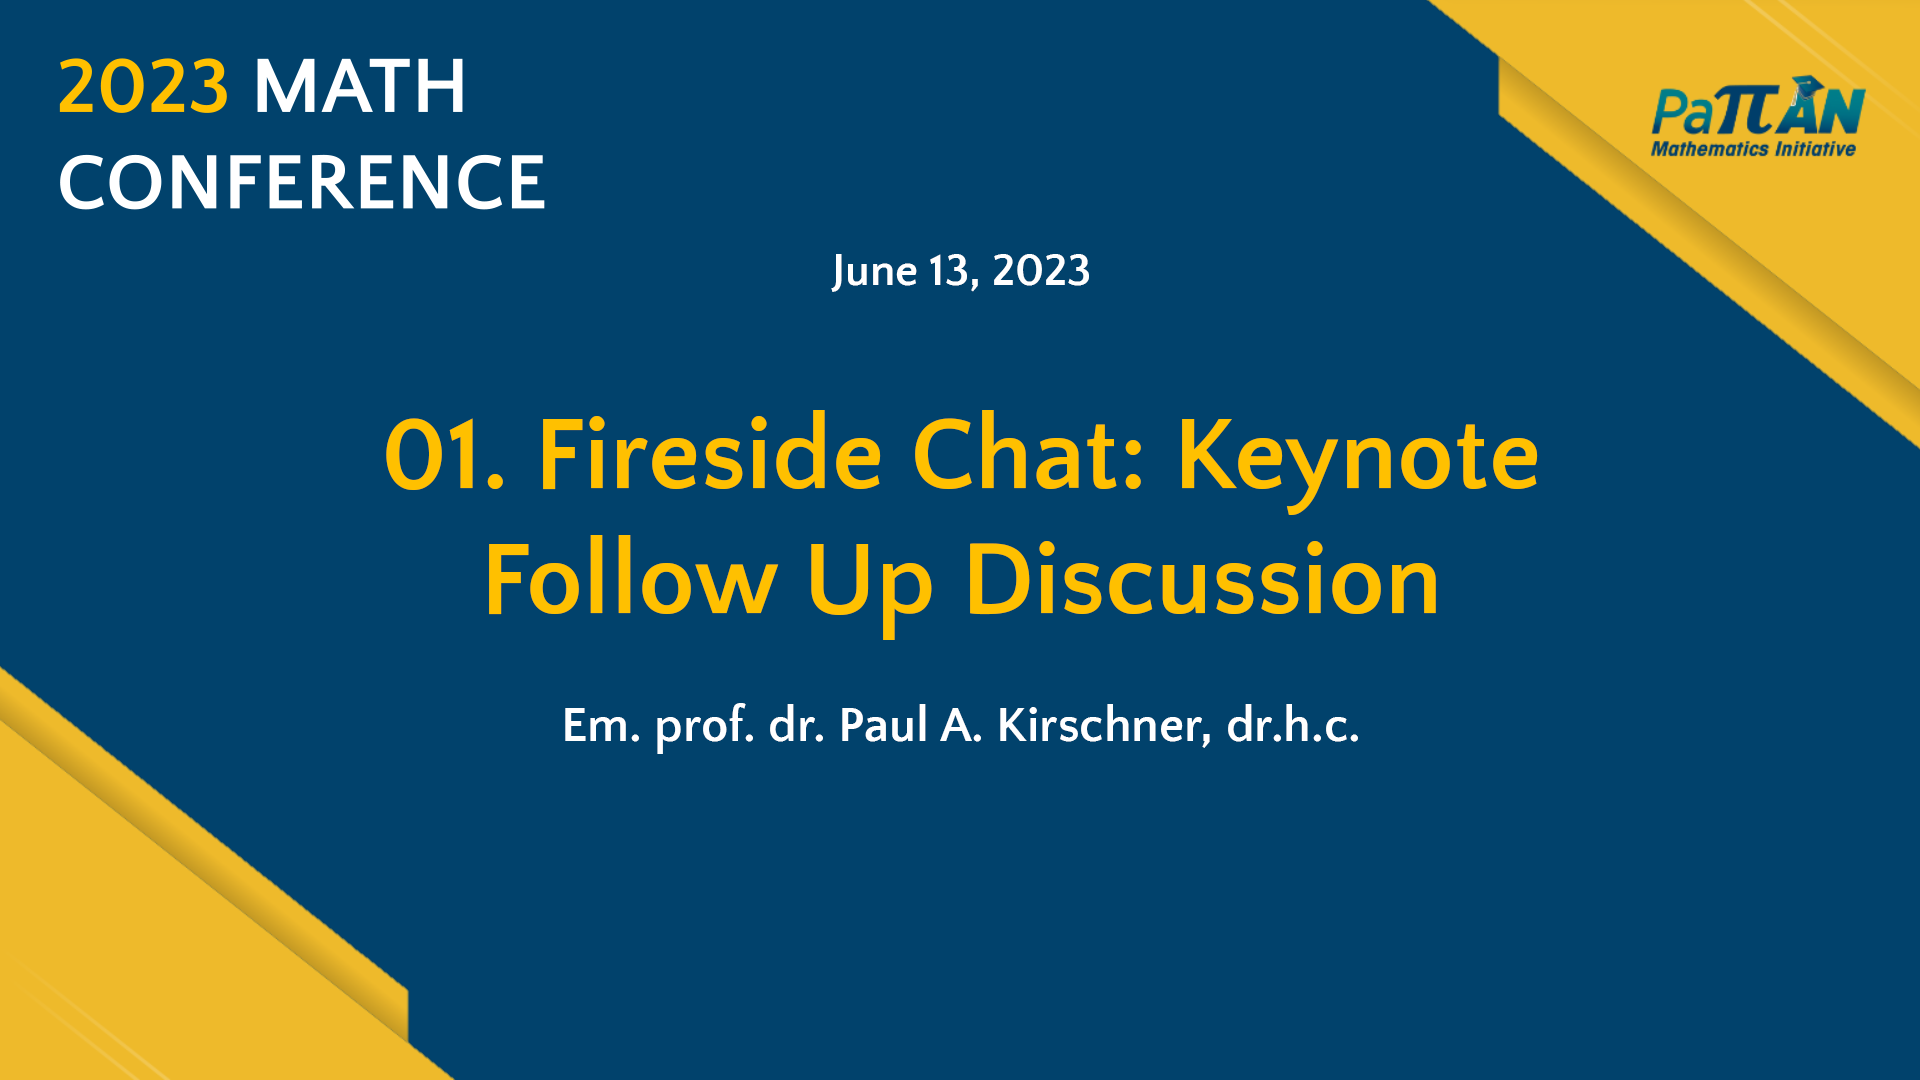 01. Fireside Chat: Keynote Follow Up Discussion | Math Conference 2023